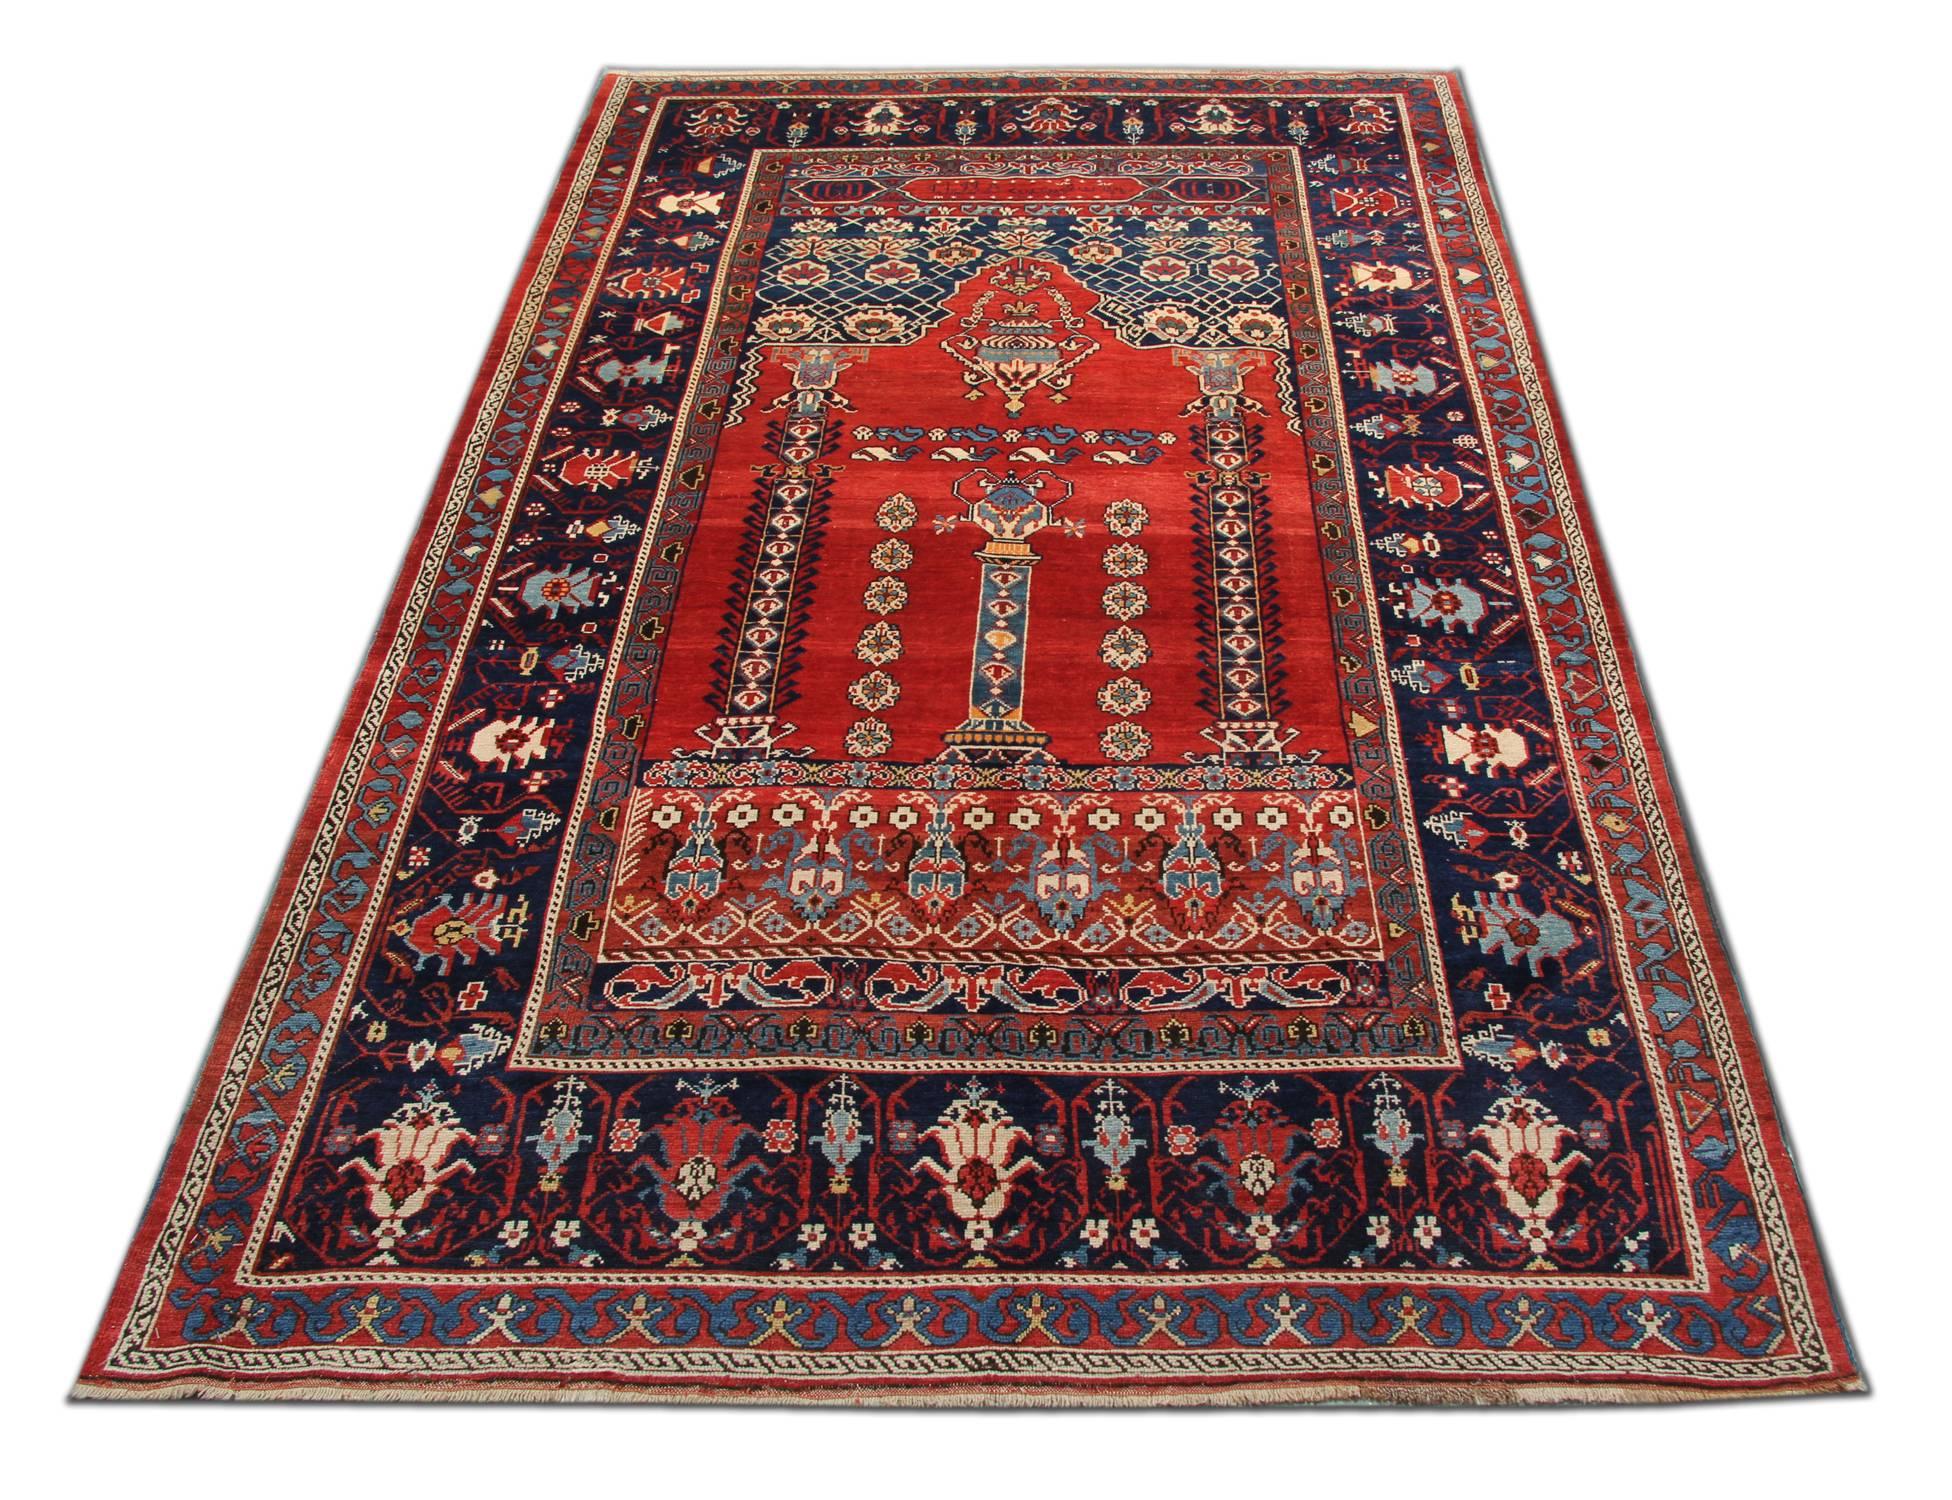 Antique Rug Caucasian Kazak, circa the 1890s, oriental rugs design. fantastic Patterned rugs from the 18th century using vibrant colours and geometric designs and can be a very elegant rug for part of the home decor as a living room rugs or hallways